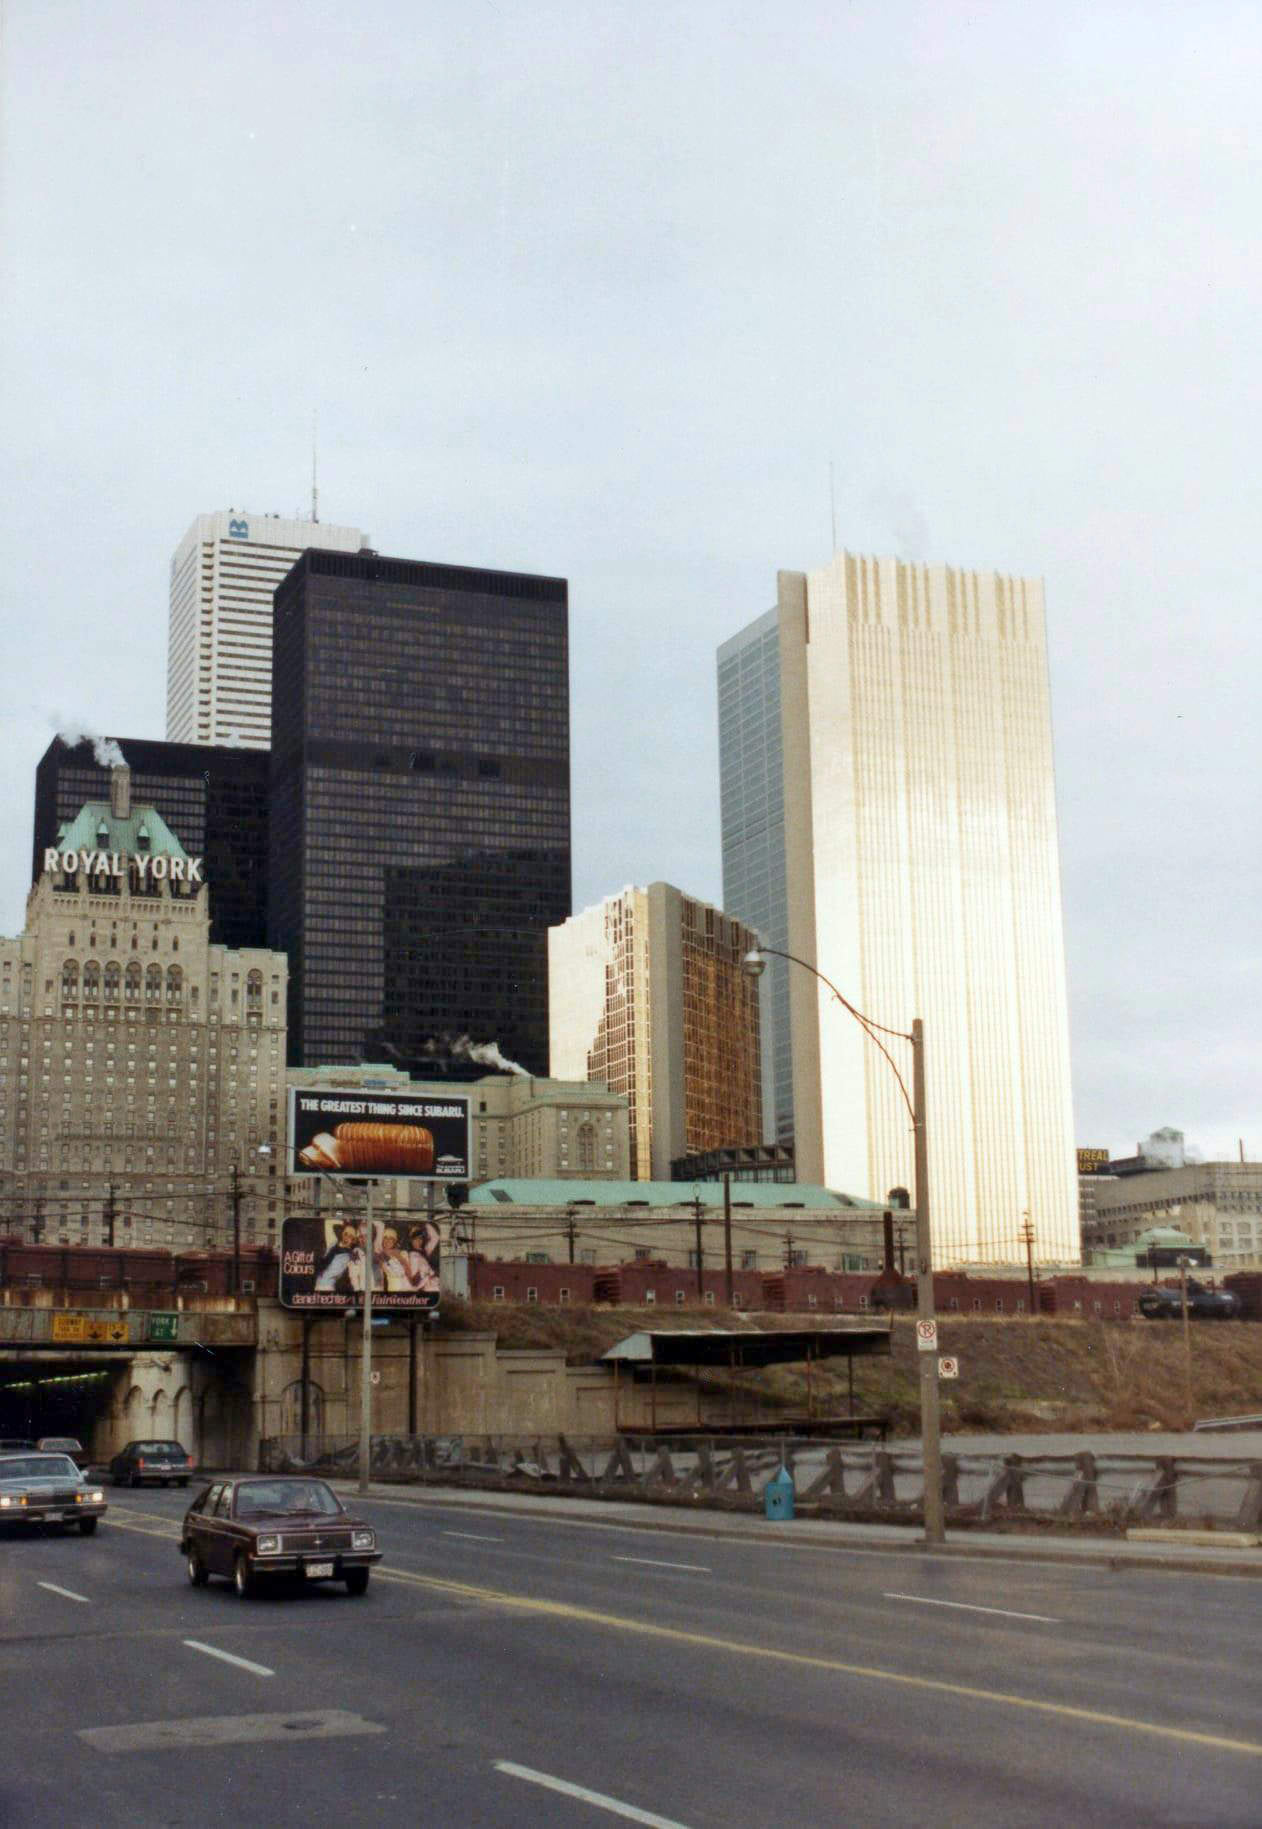 Looking north on York Street to Union Station, the Royal York Hotel and the Financial District, 1983.